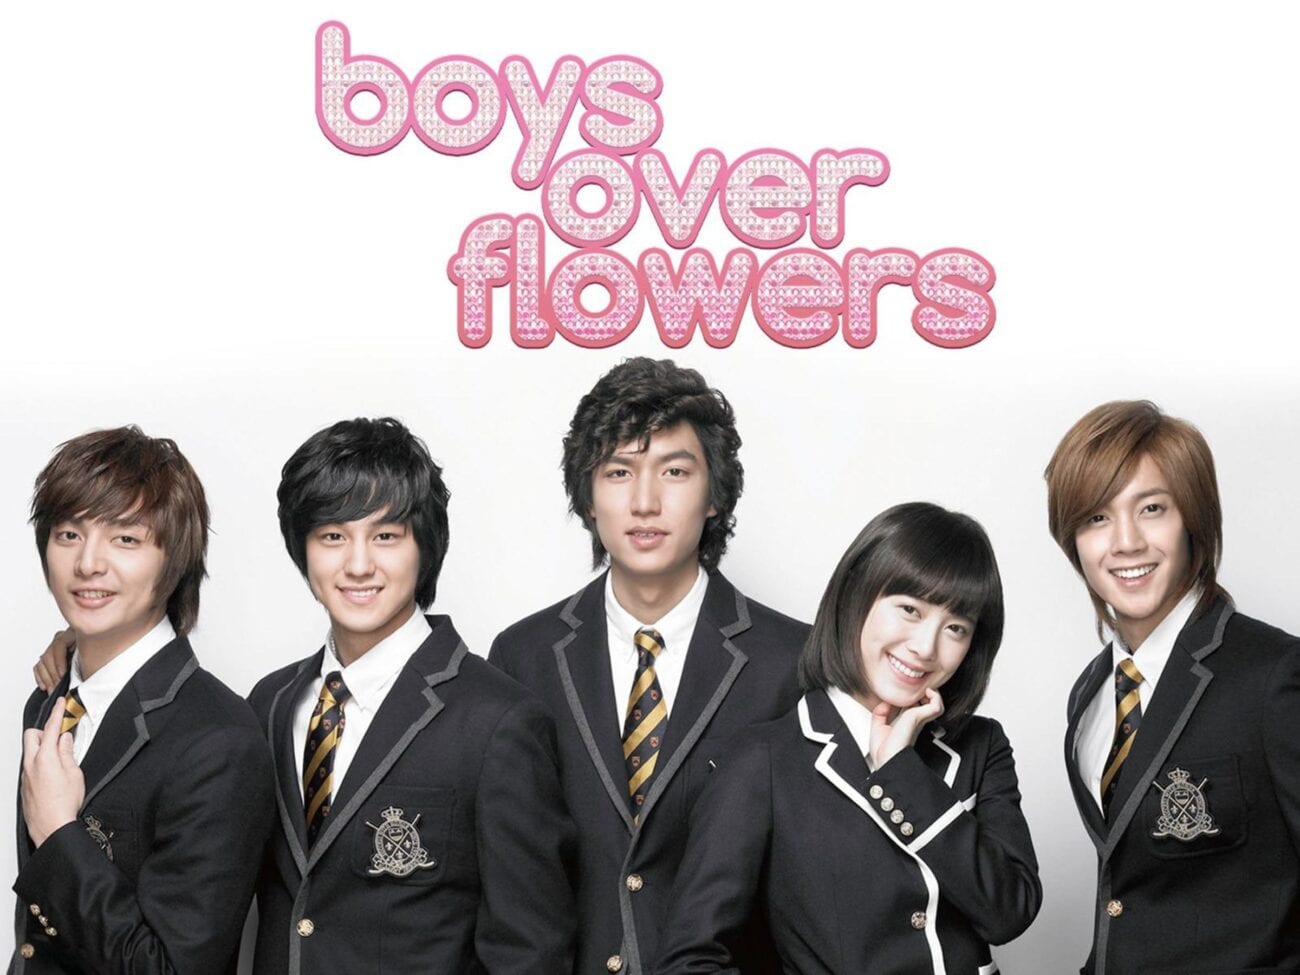 When 'Boys Over Flowers' came out, it quickly gained international acclaim. After many years, we're wondering how the K-drama maintains its popularity.